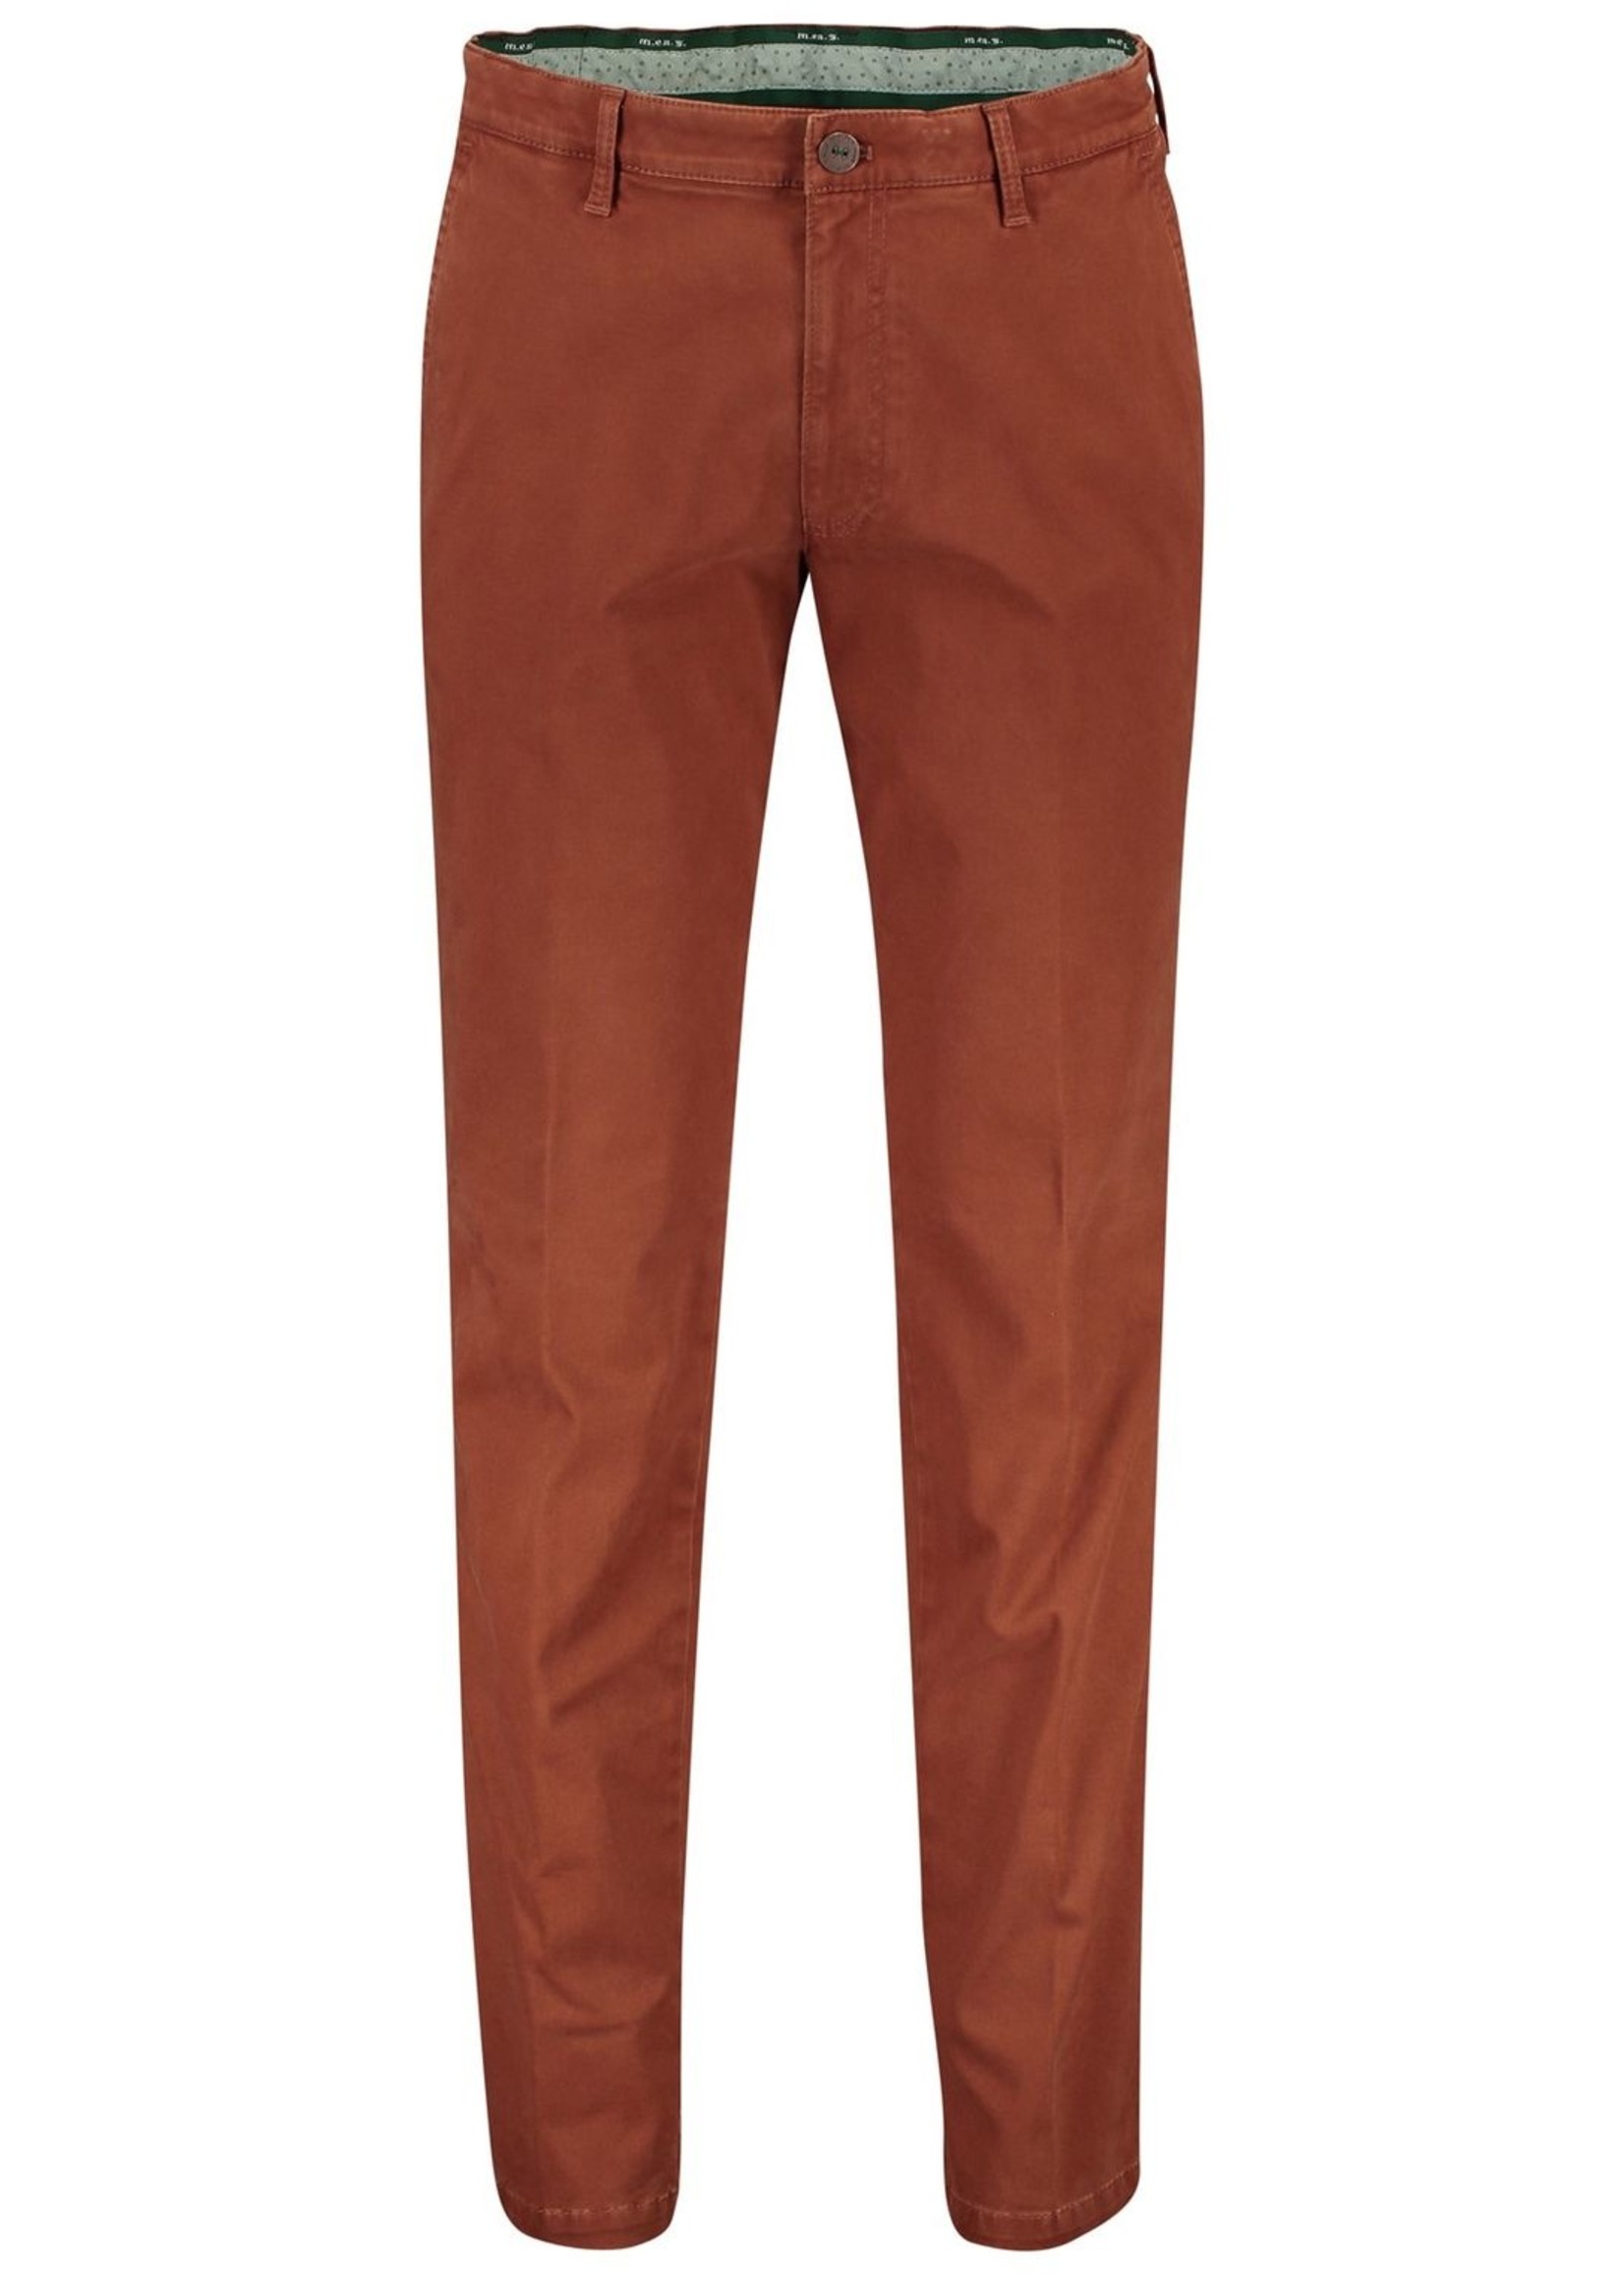 M.E.N.S. Madison casual pant